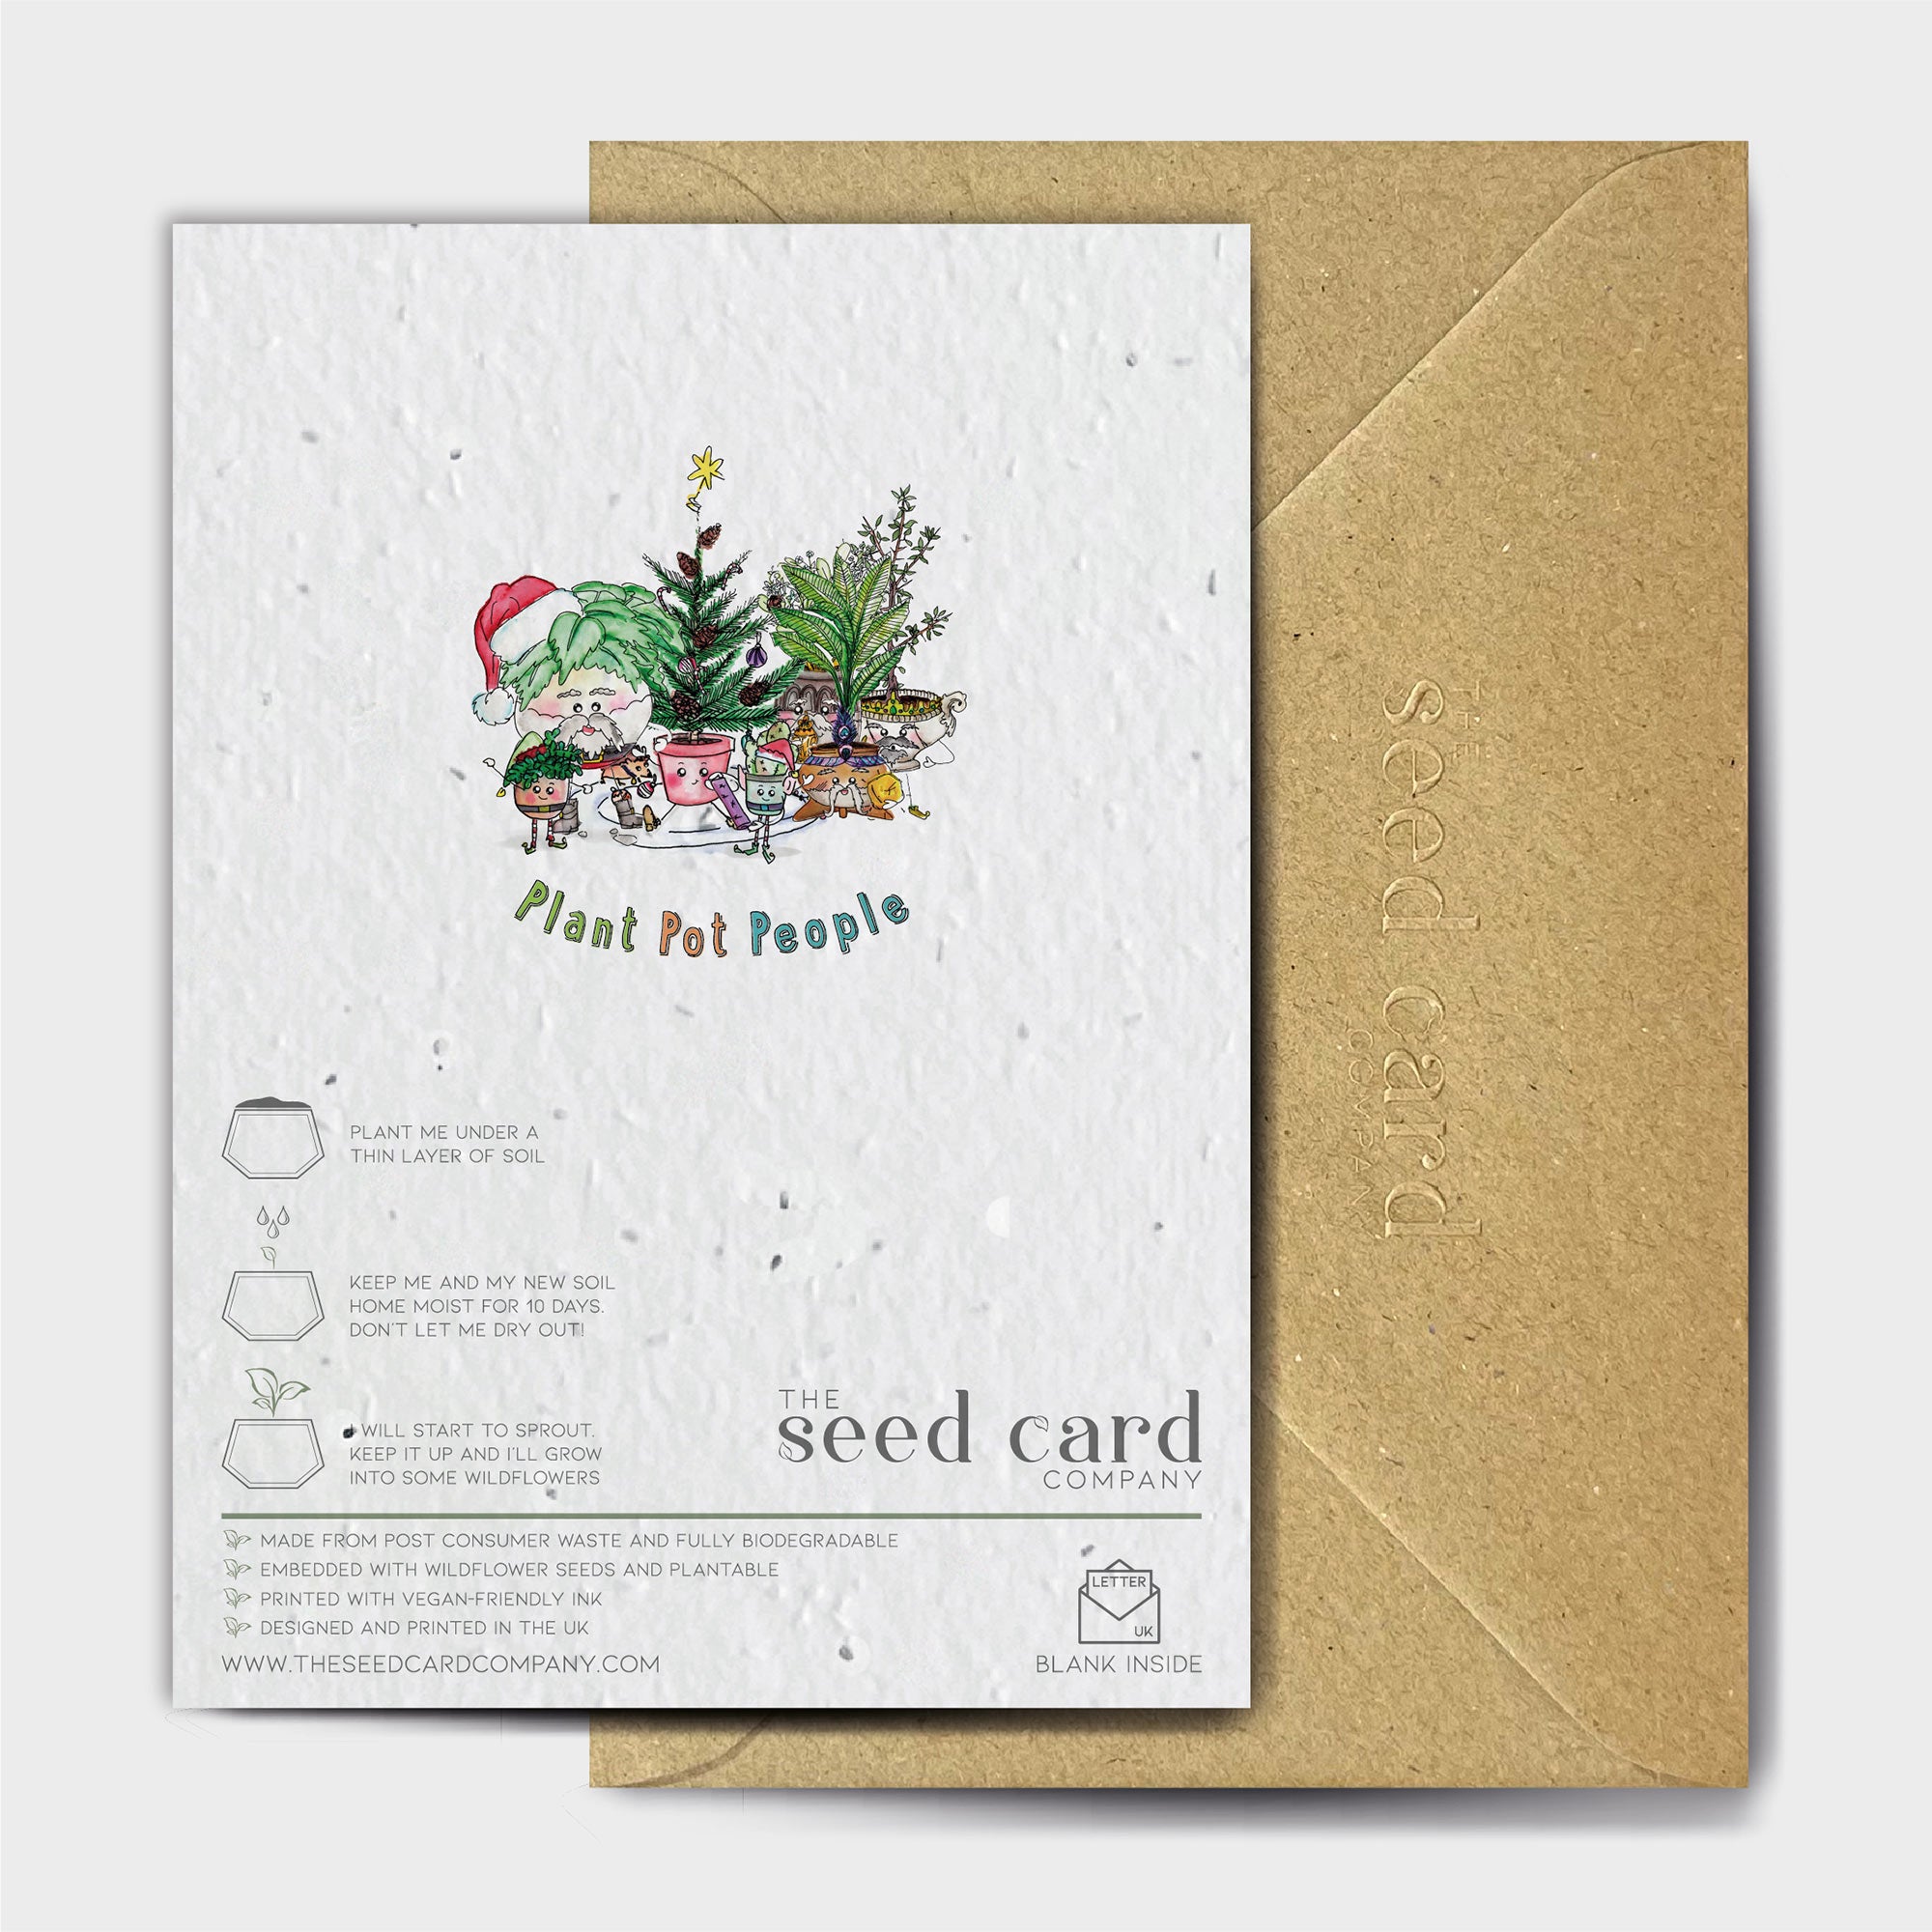 Shop online No Coal Here - 100% biodegradable seed-embedded cards Shop -The Seed Card Company